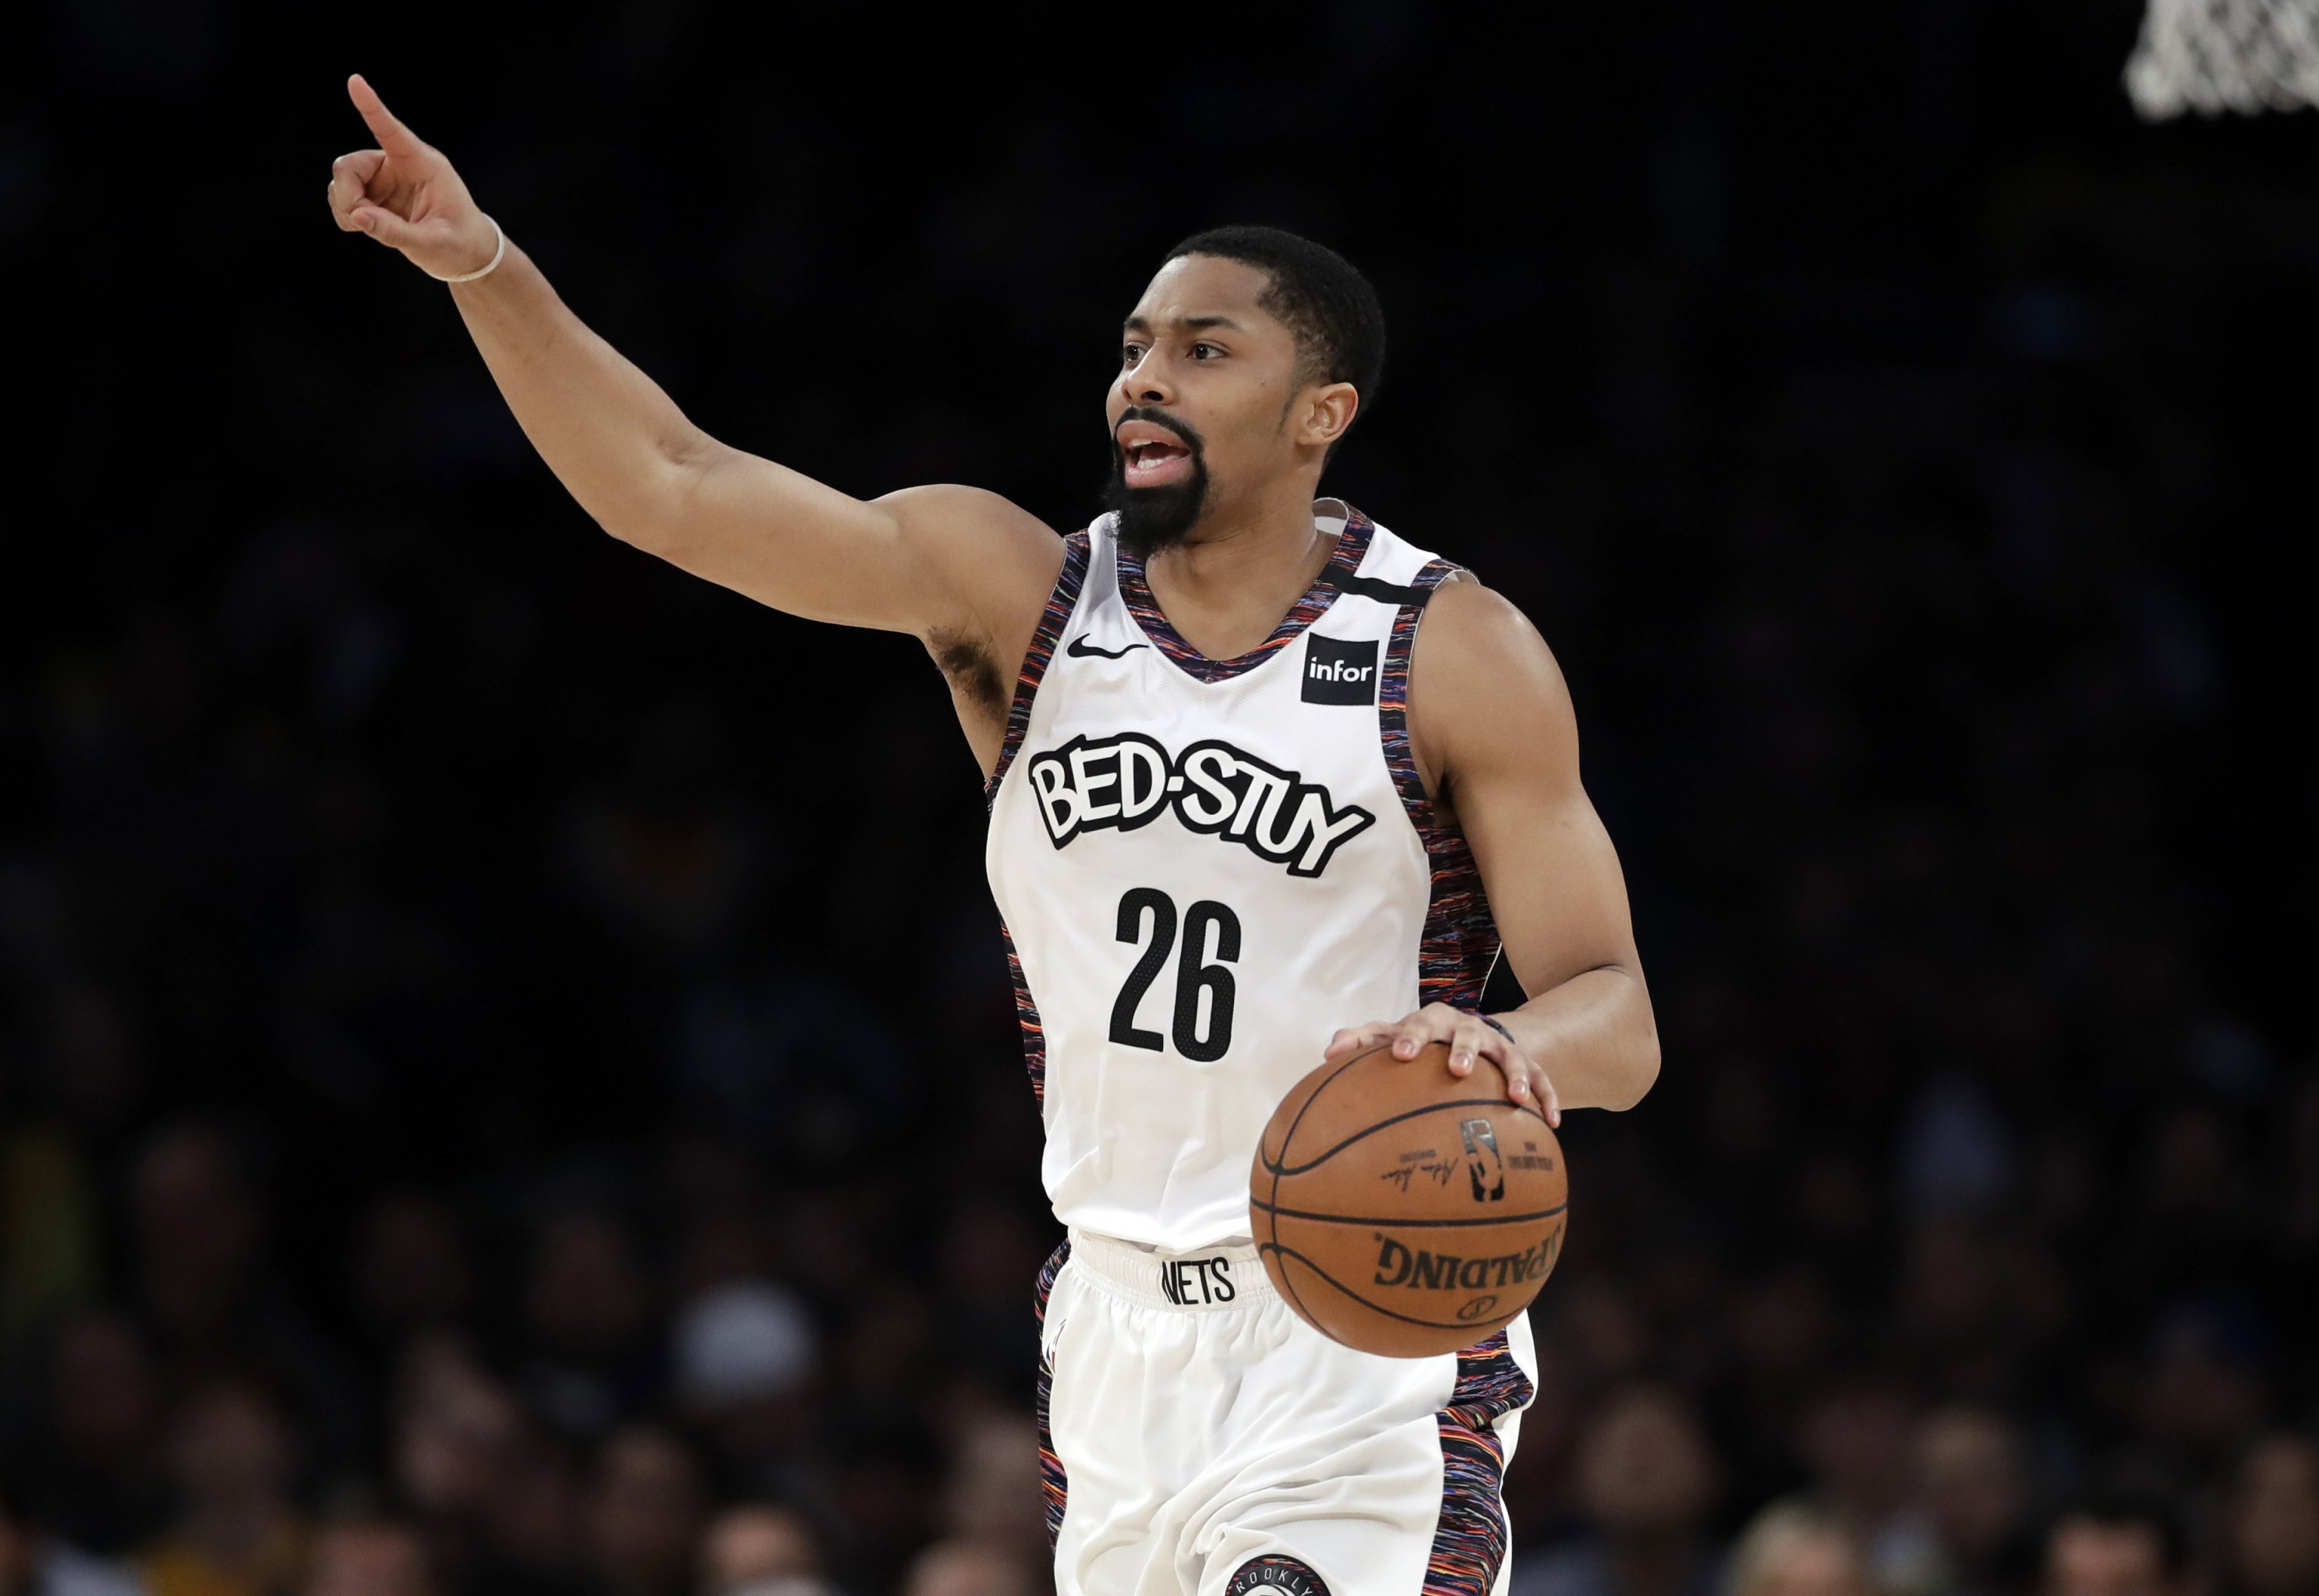 Looking for depth at center, Nets reportedly open to trading Harris, Curry,  Mills - NBC Sports